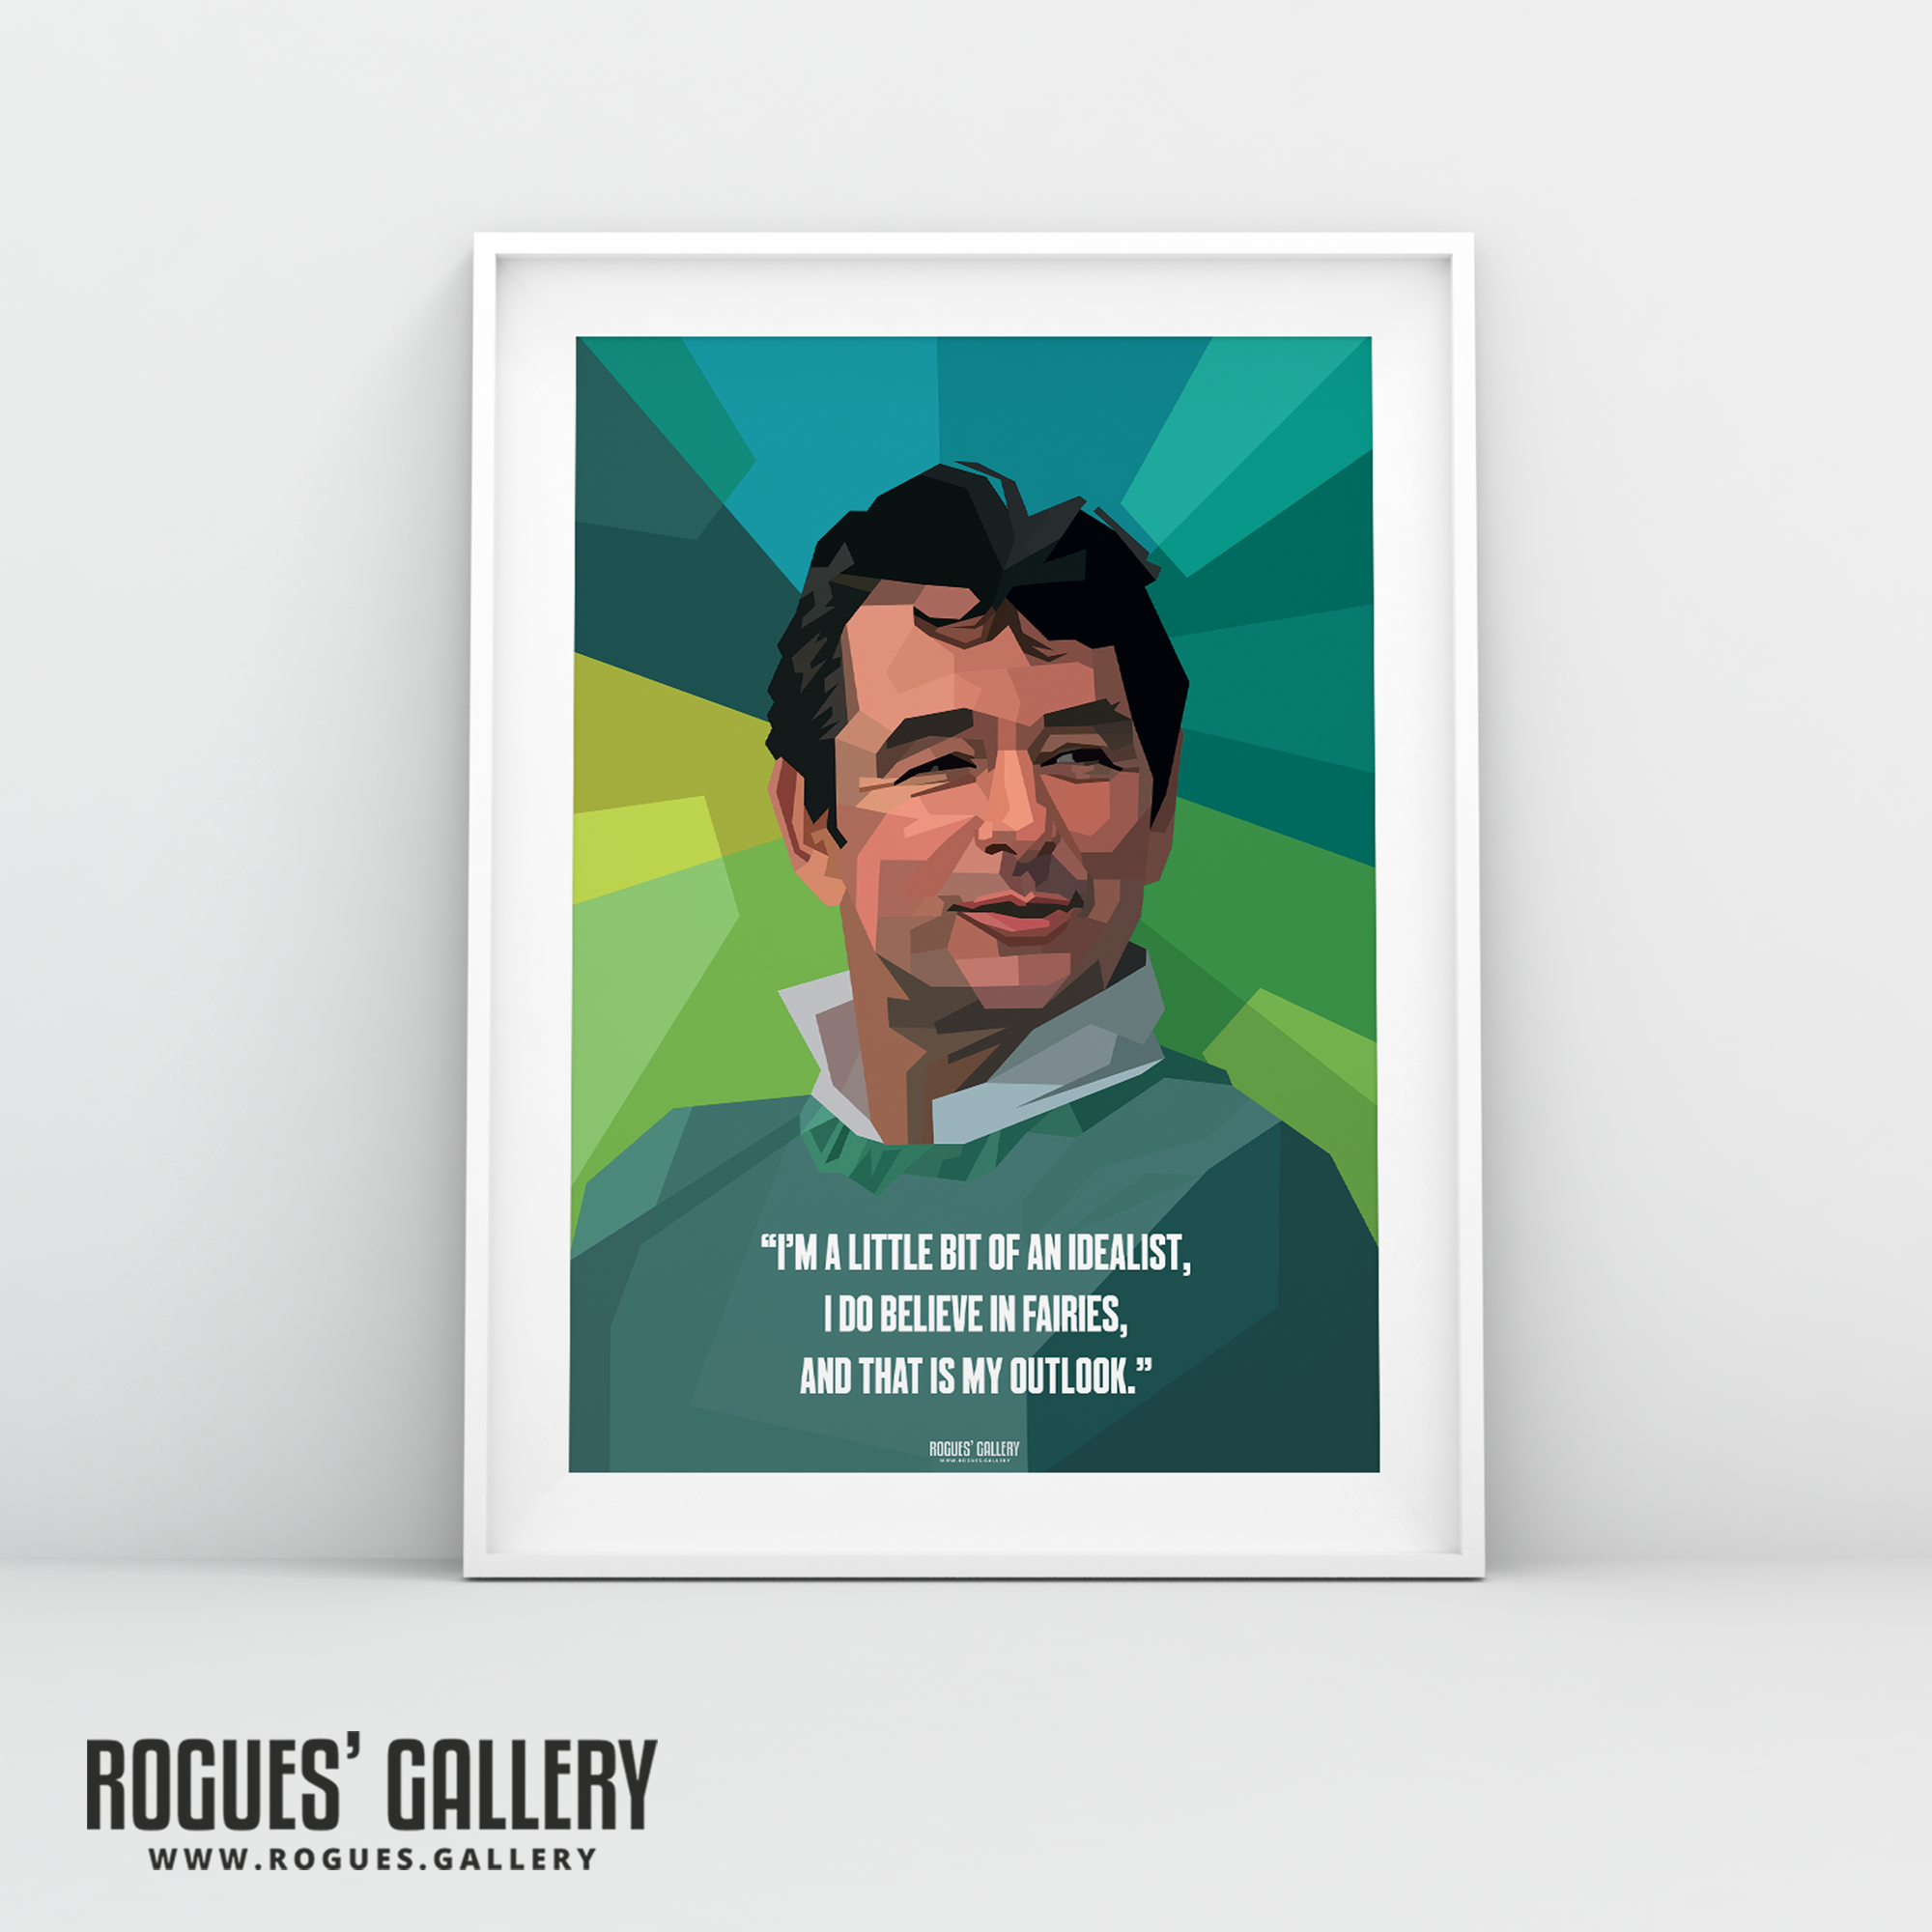 Brian Clough Nottingham Forest believe in fairies quote A3 print